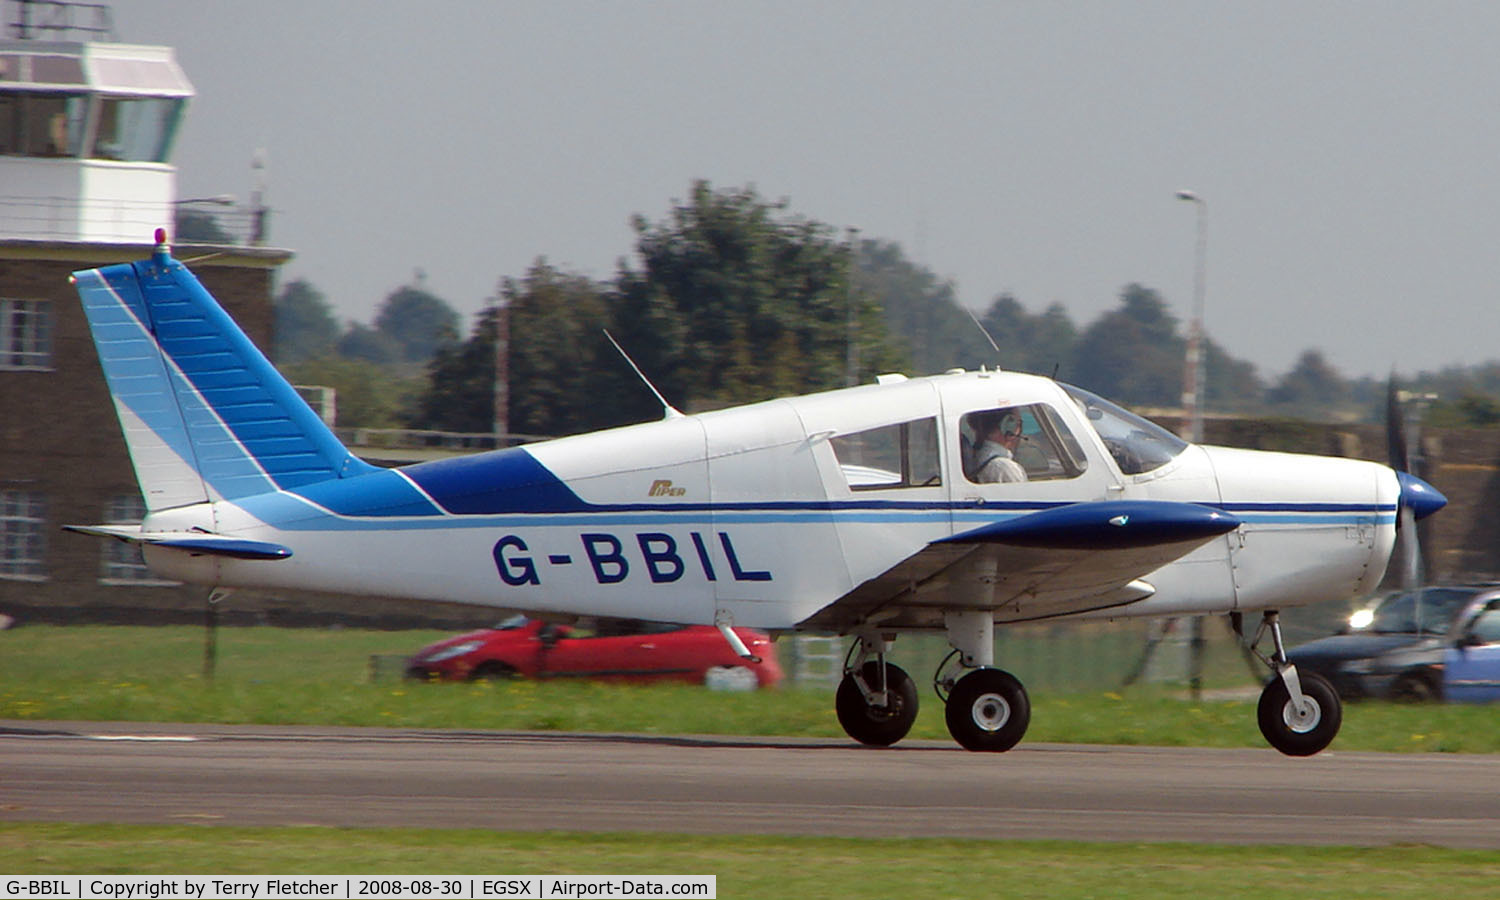 G-BBIL, 1967 Piper PA-28-140 Cherokee C/N 28-22567, Piper Pa-28-140 taxies in at North Weald